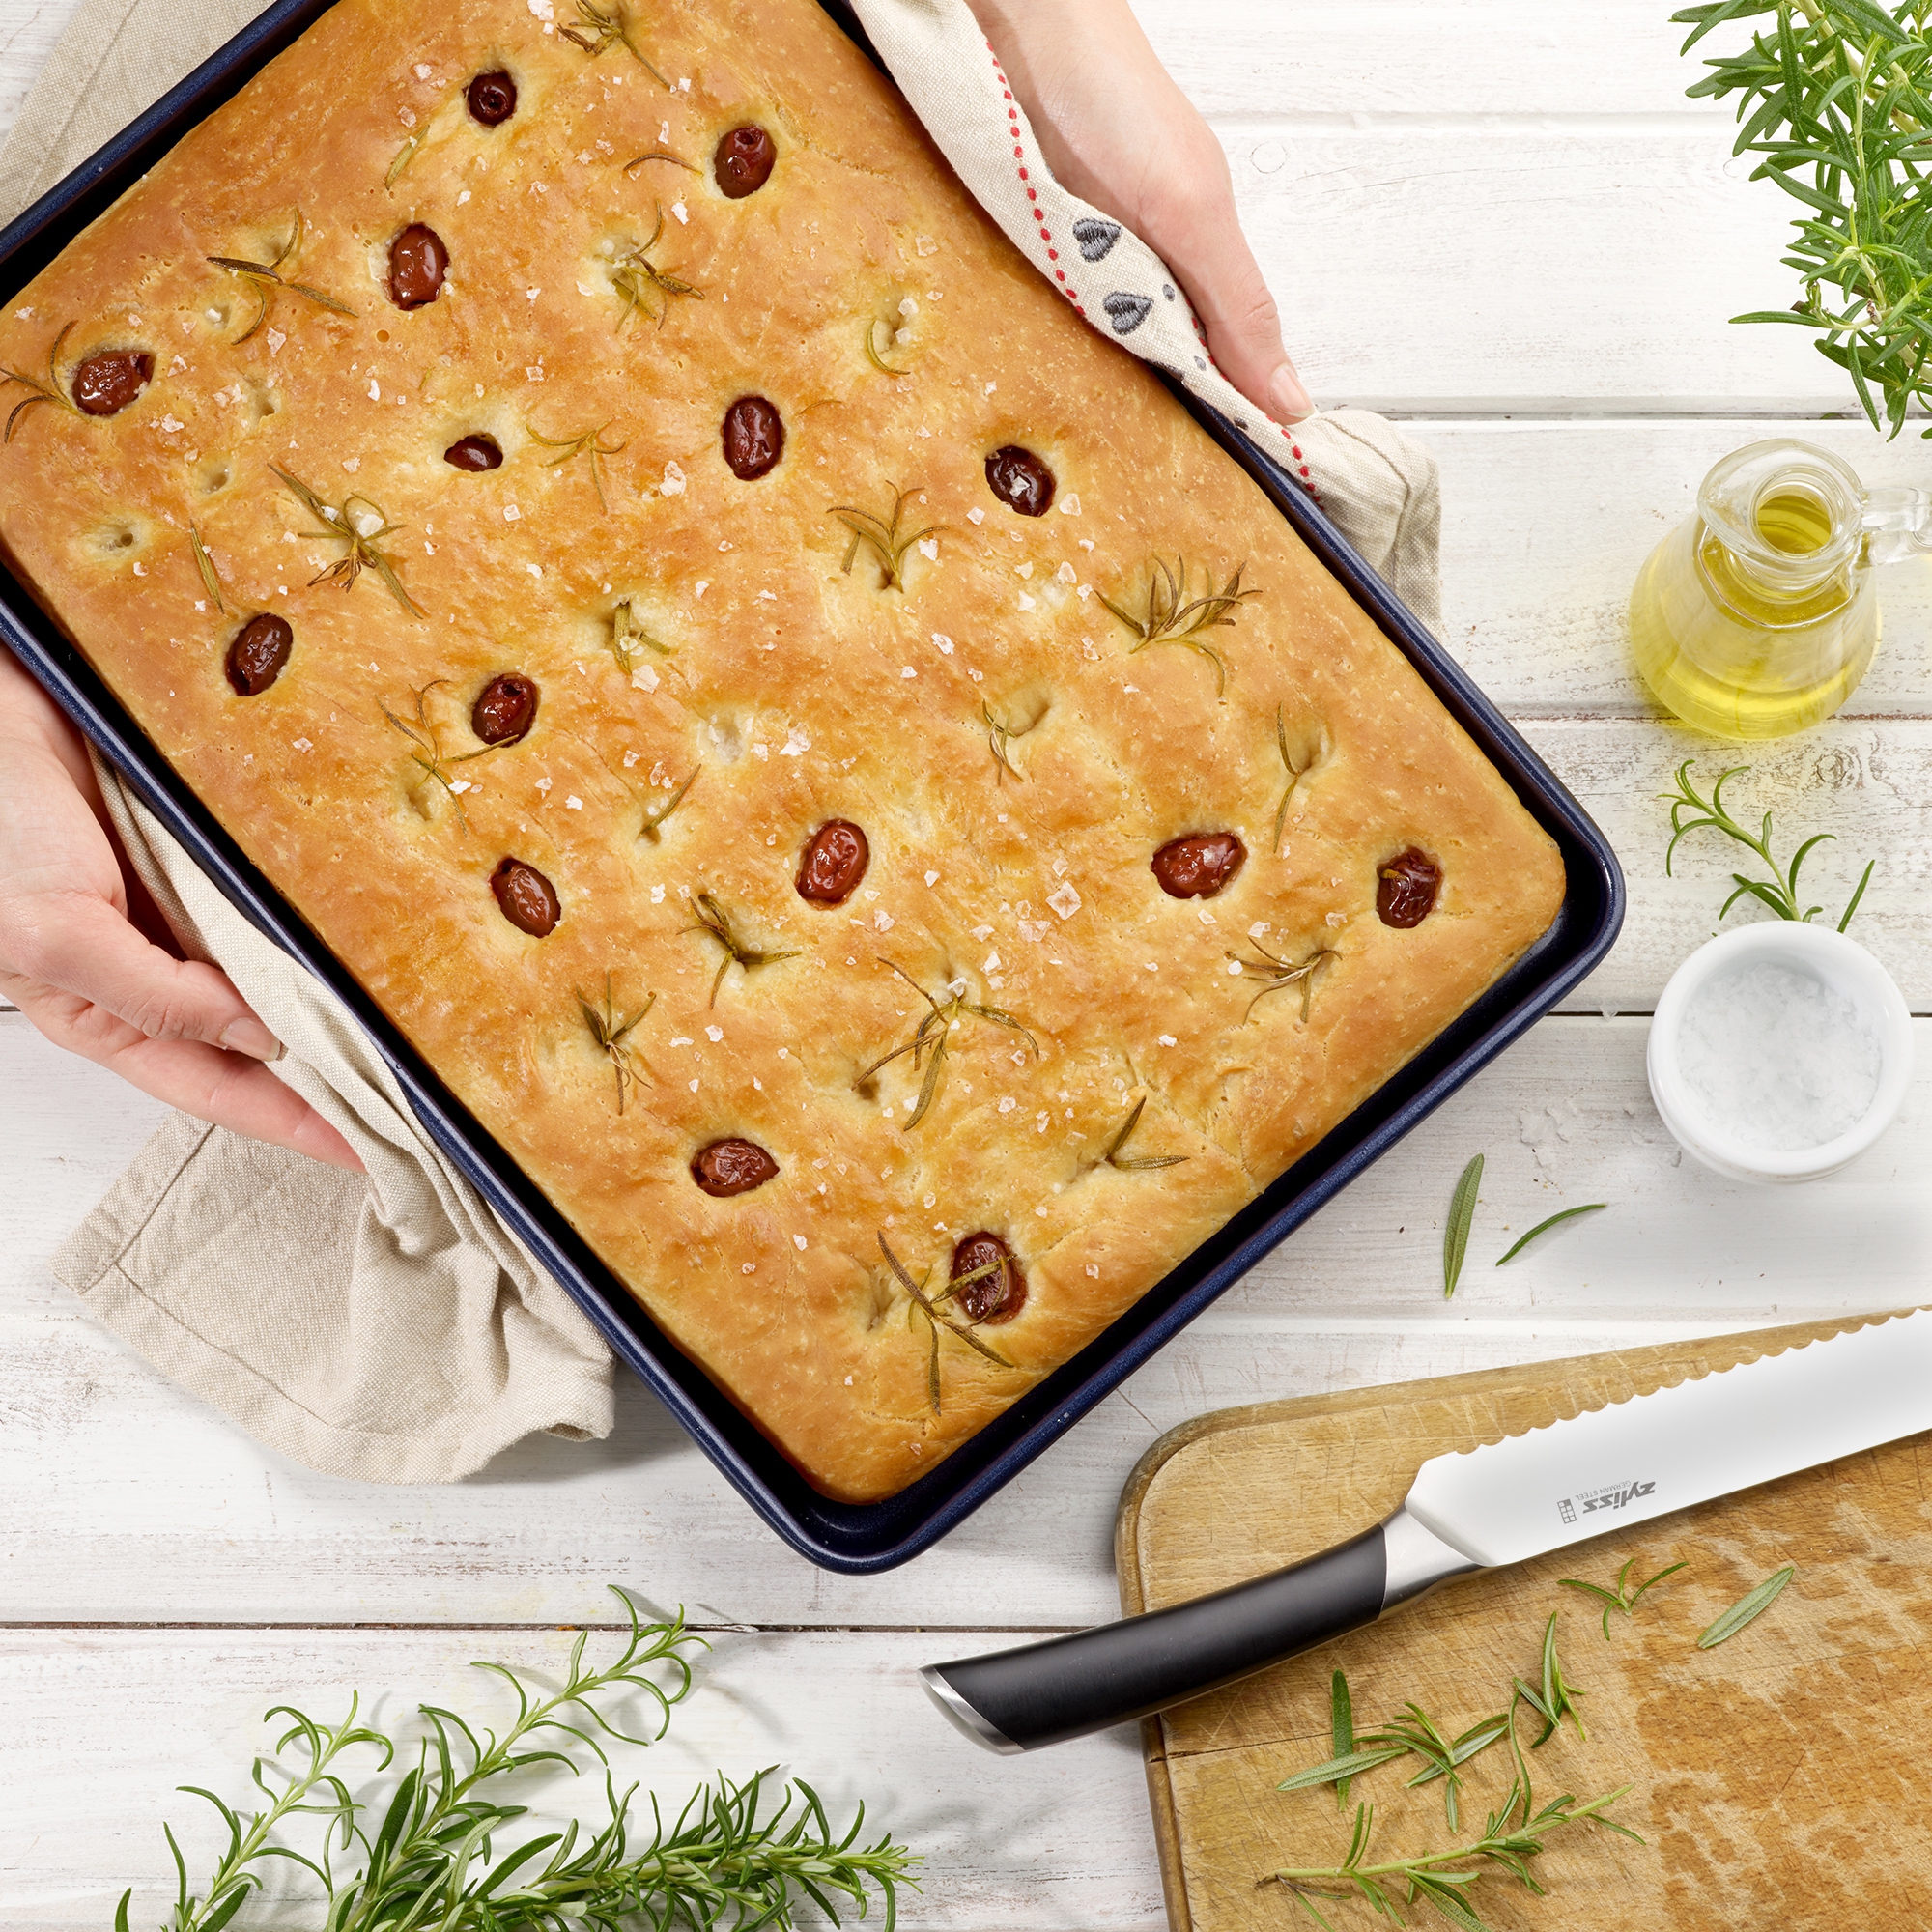 ZYLISS - Baking tray with non-stick coating - 39 cm x 27 cm